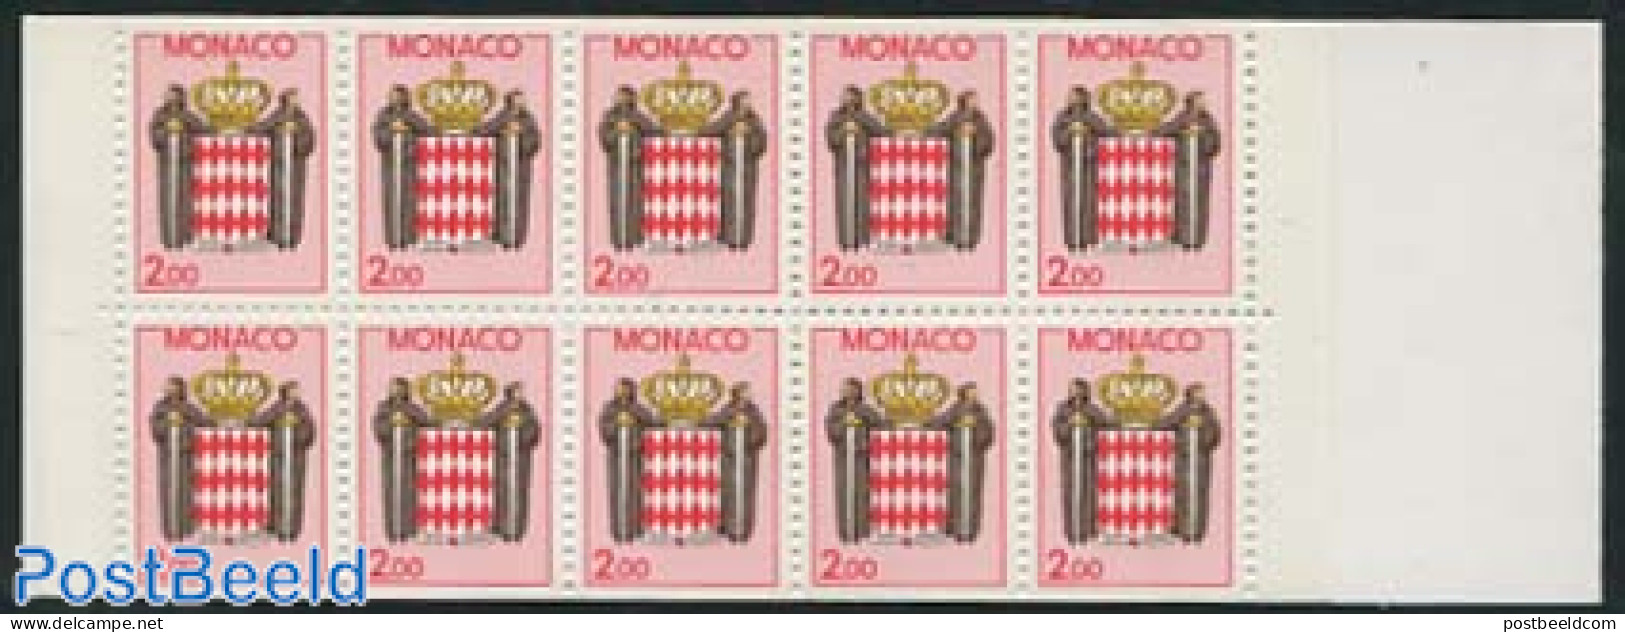 Monaco 1988 Coat Of Arms Booklet, Mint NH, History - Coat Of Arms - Stamp Booklets - Ongebruikt